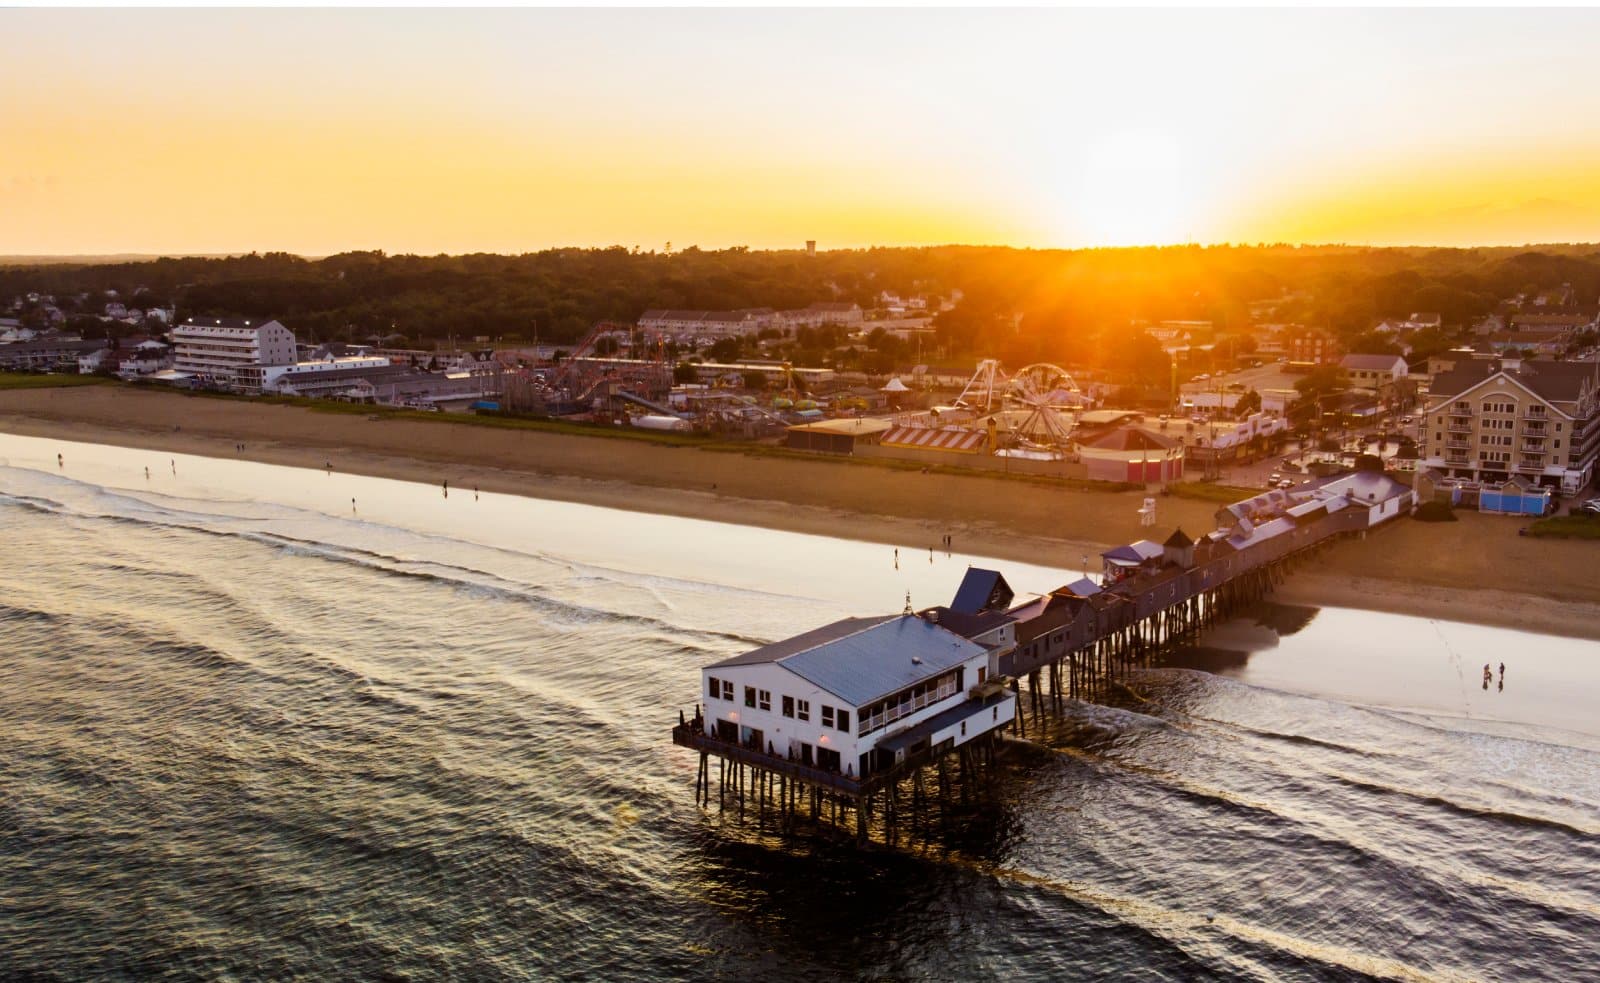 <p class="wp-caption-text">Image Credit: Shutterstock / Mircea Costina</p>  <p>Bask in the sun at Old Orchard Beach, home to a historic pier, amusement park, and 7 miles of sandy beach. It’s a family-friendly destination with a lively boardwalk and affordable seaside accommodations.</p>